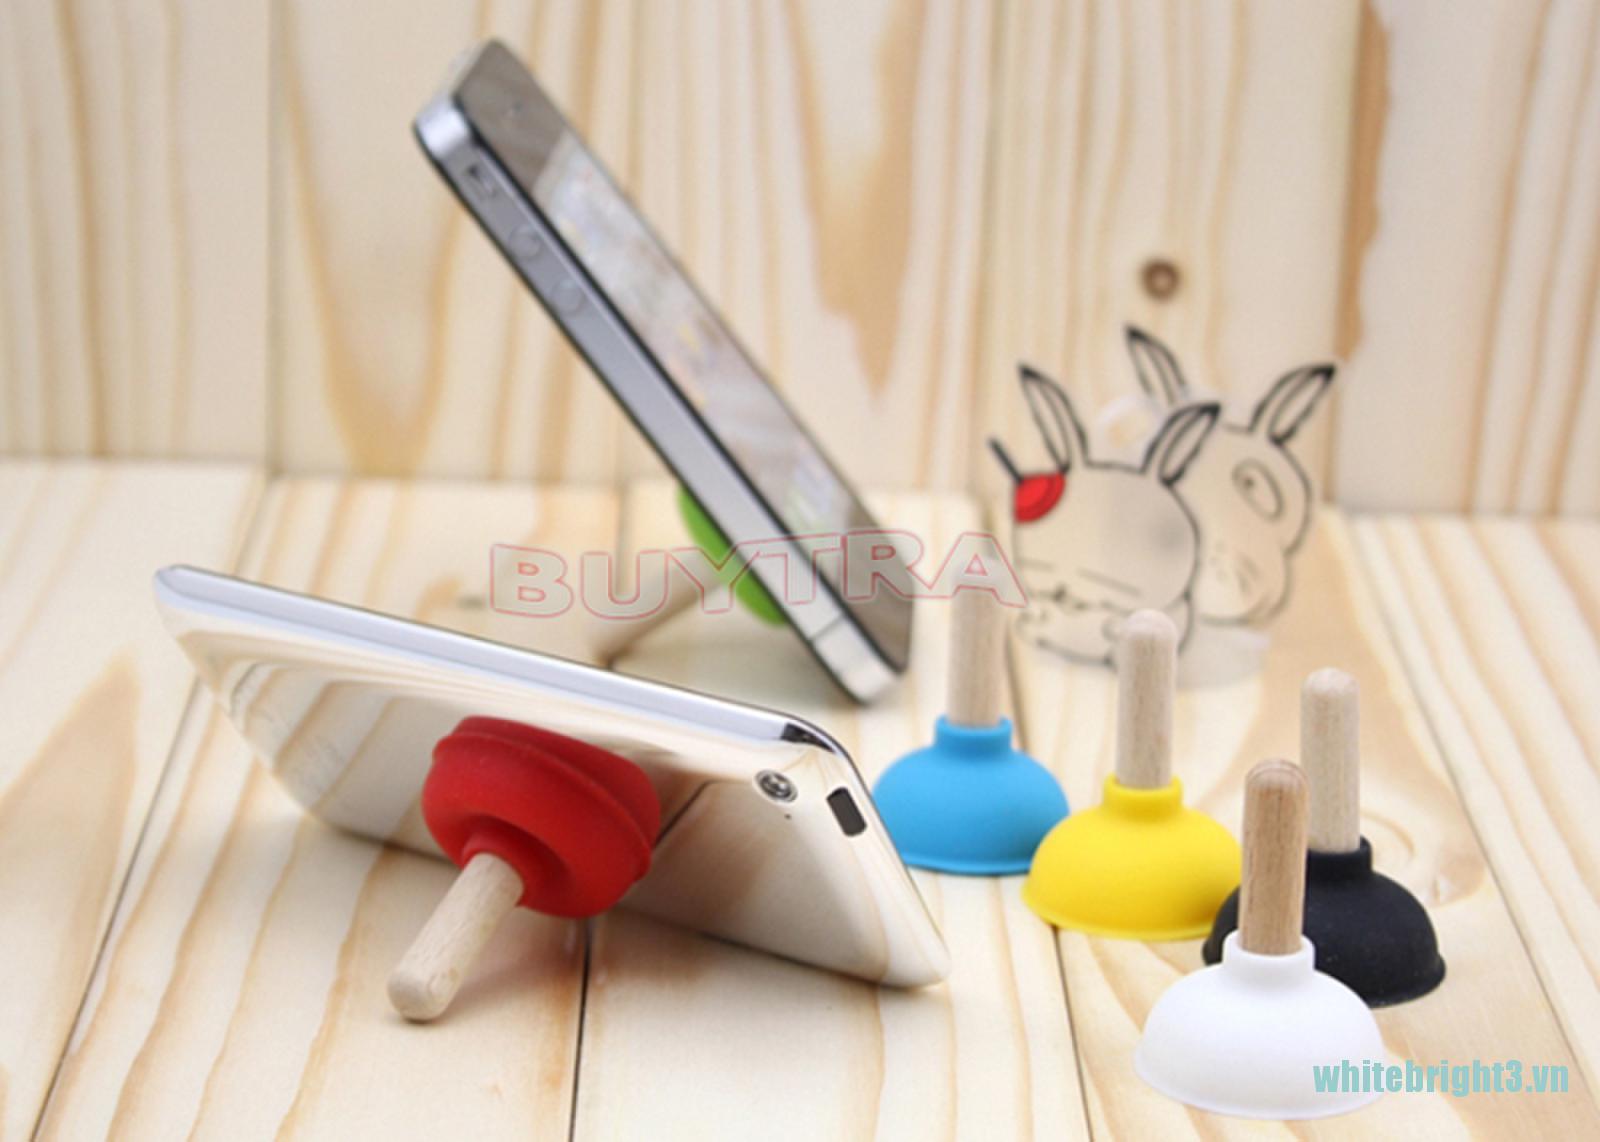 IPHONE White / Lot 6 Pcs Plunger Holder Sucker Toilet Shape Wood Stand Cell Phone Phone